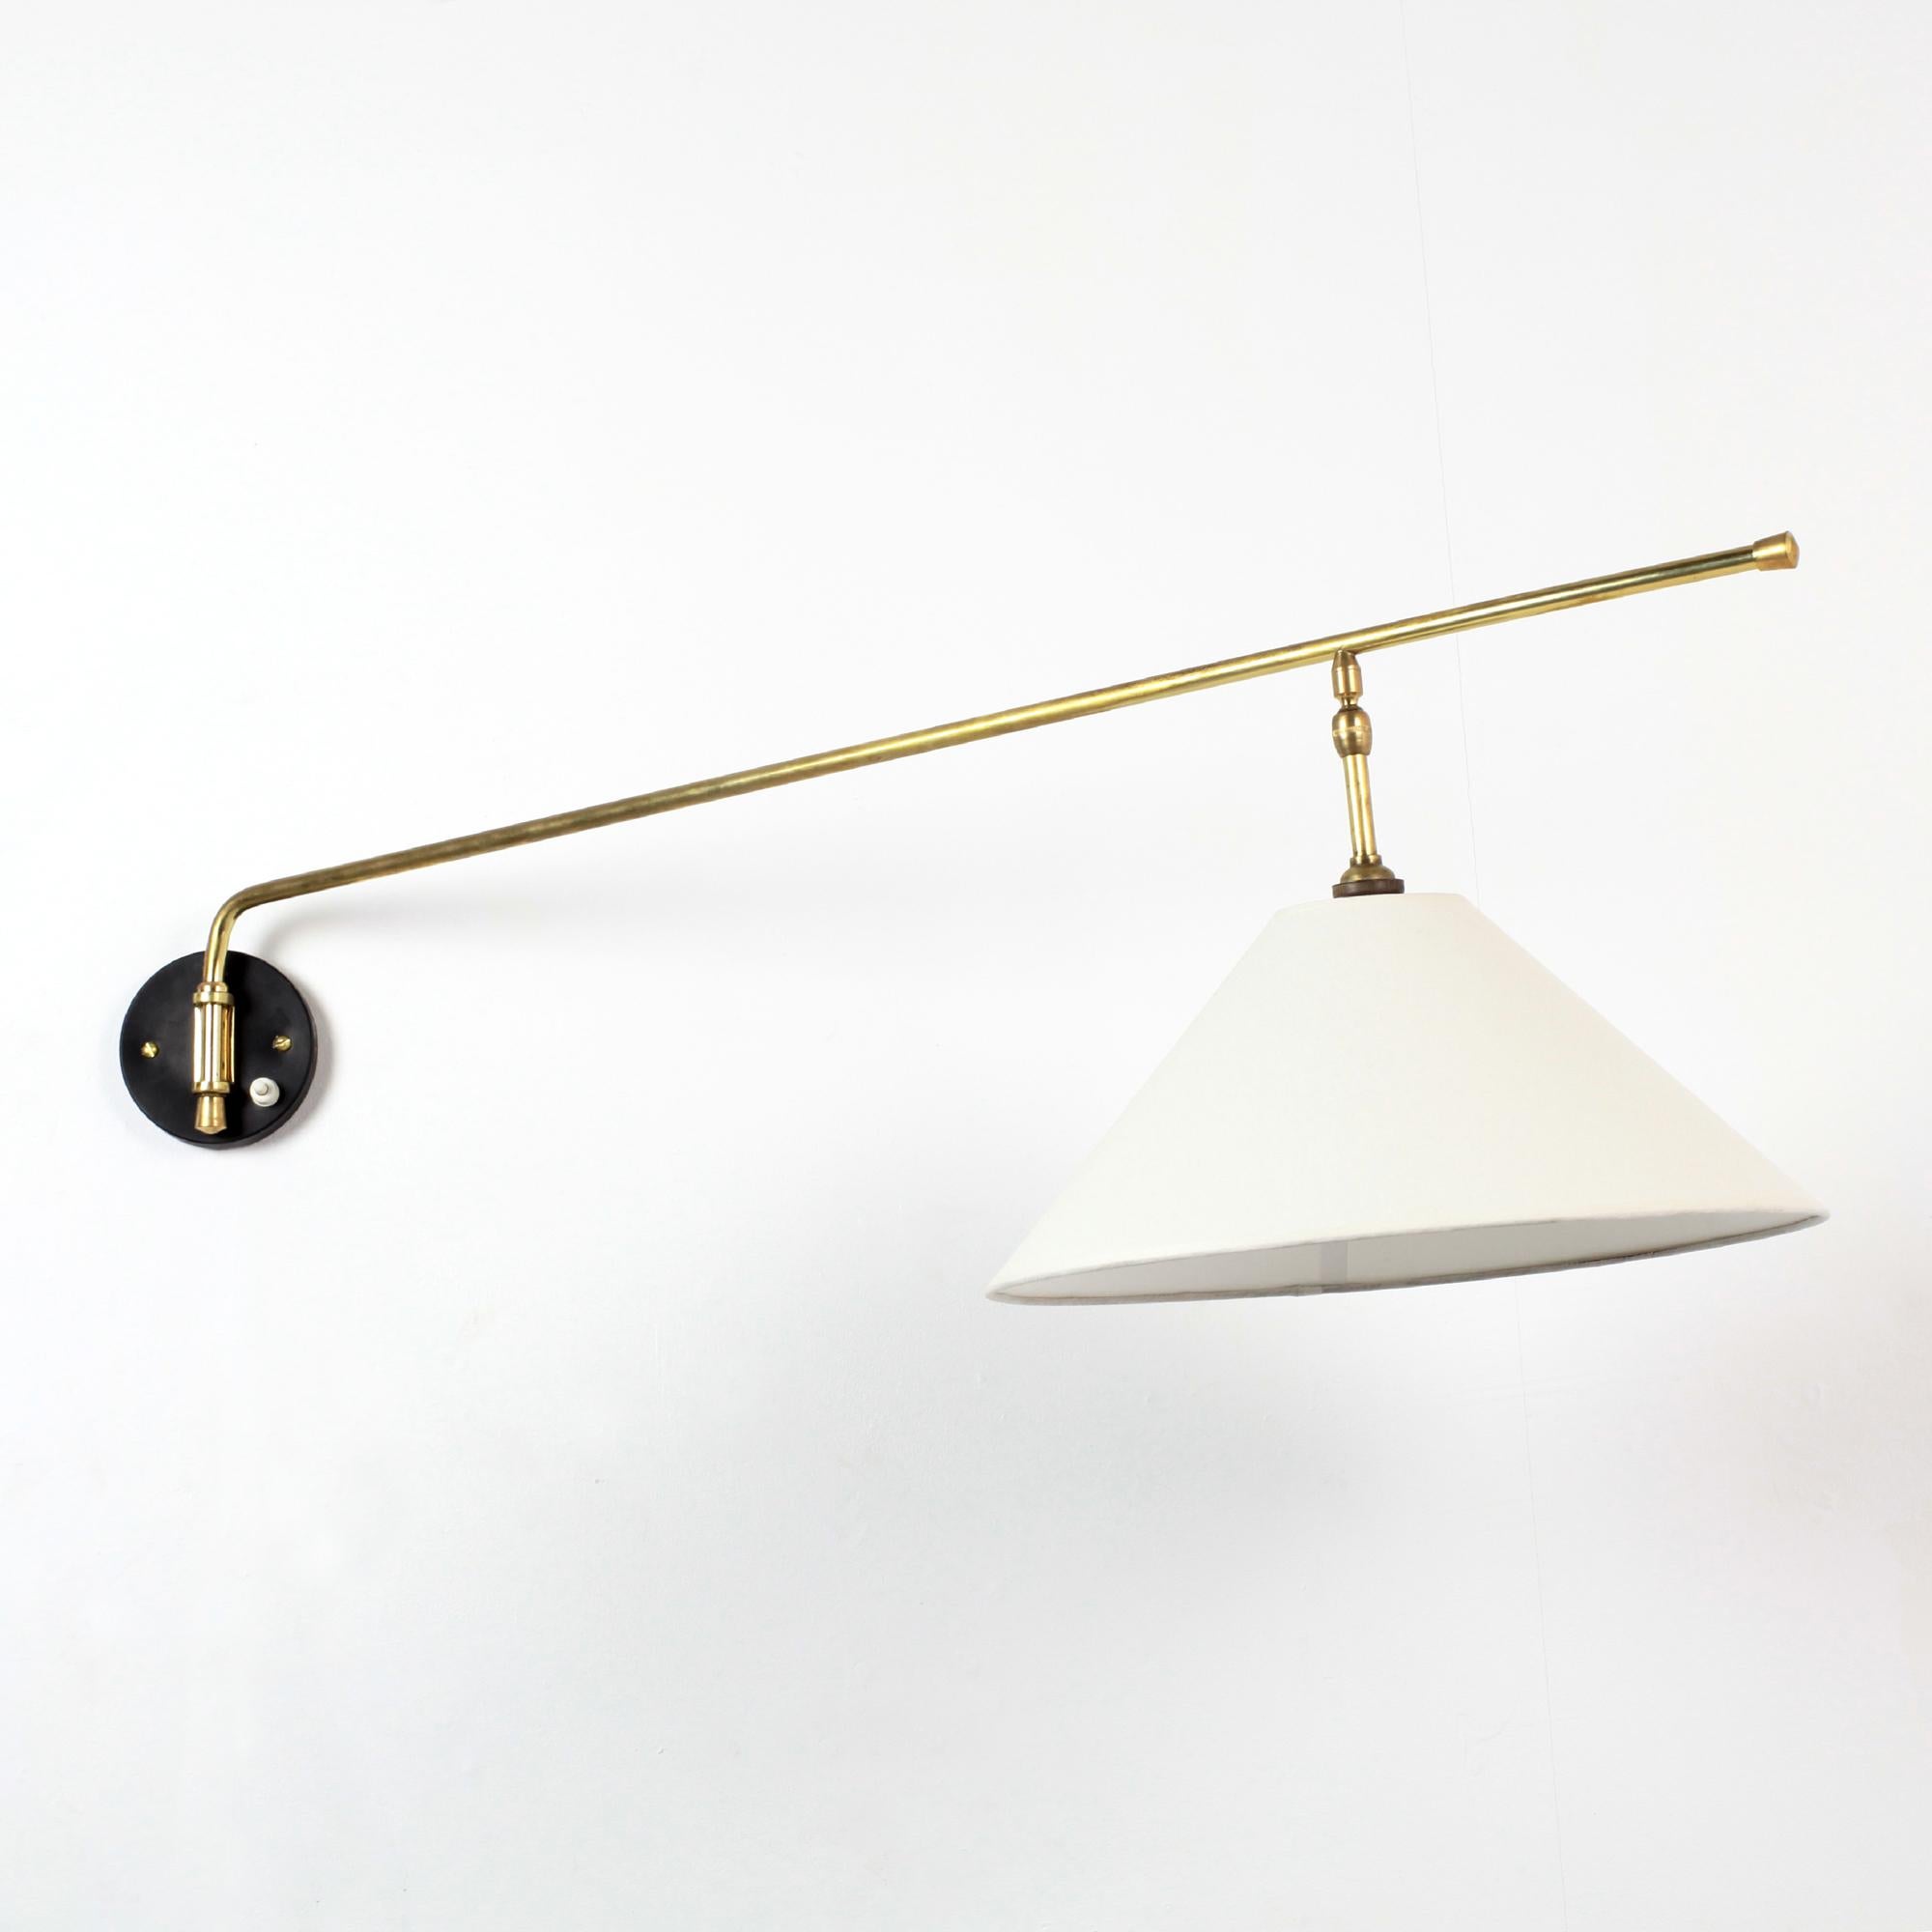 French wall lamp from the 50s composed of an articulated brass arm with a 180° rotation
The lampshade refurbished in cream cotton is also adjustable thanks to its brass ball joint.
Perfect directional light for reading.